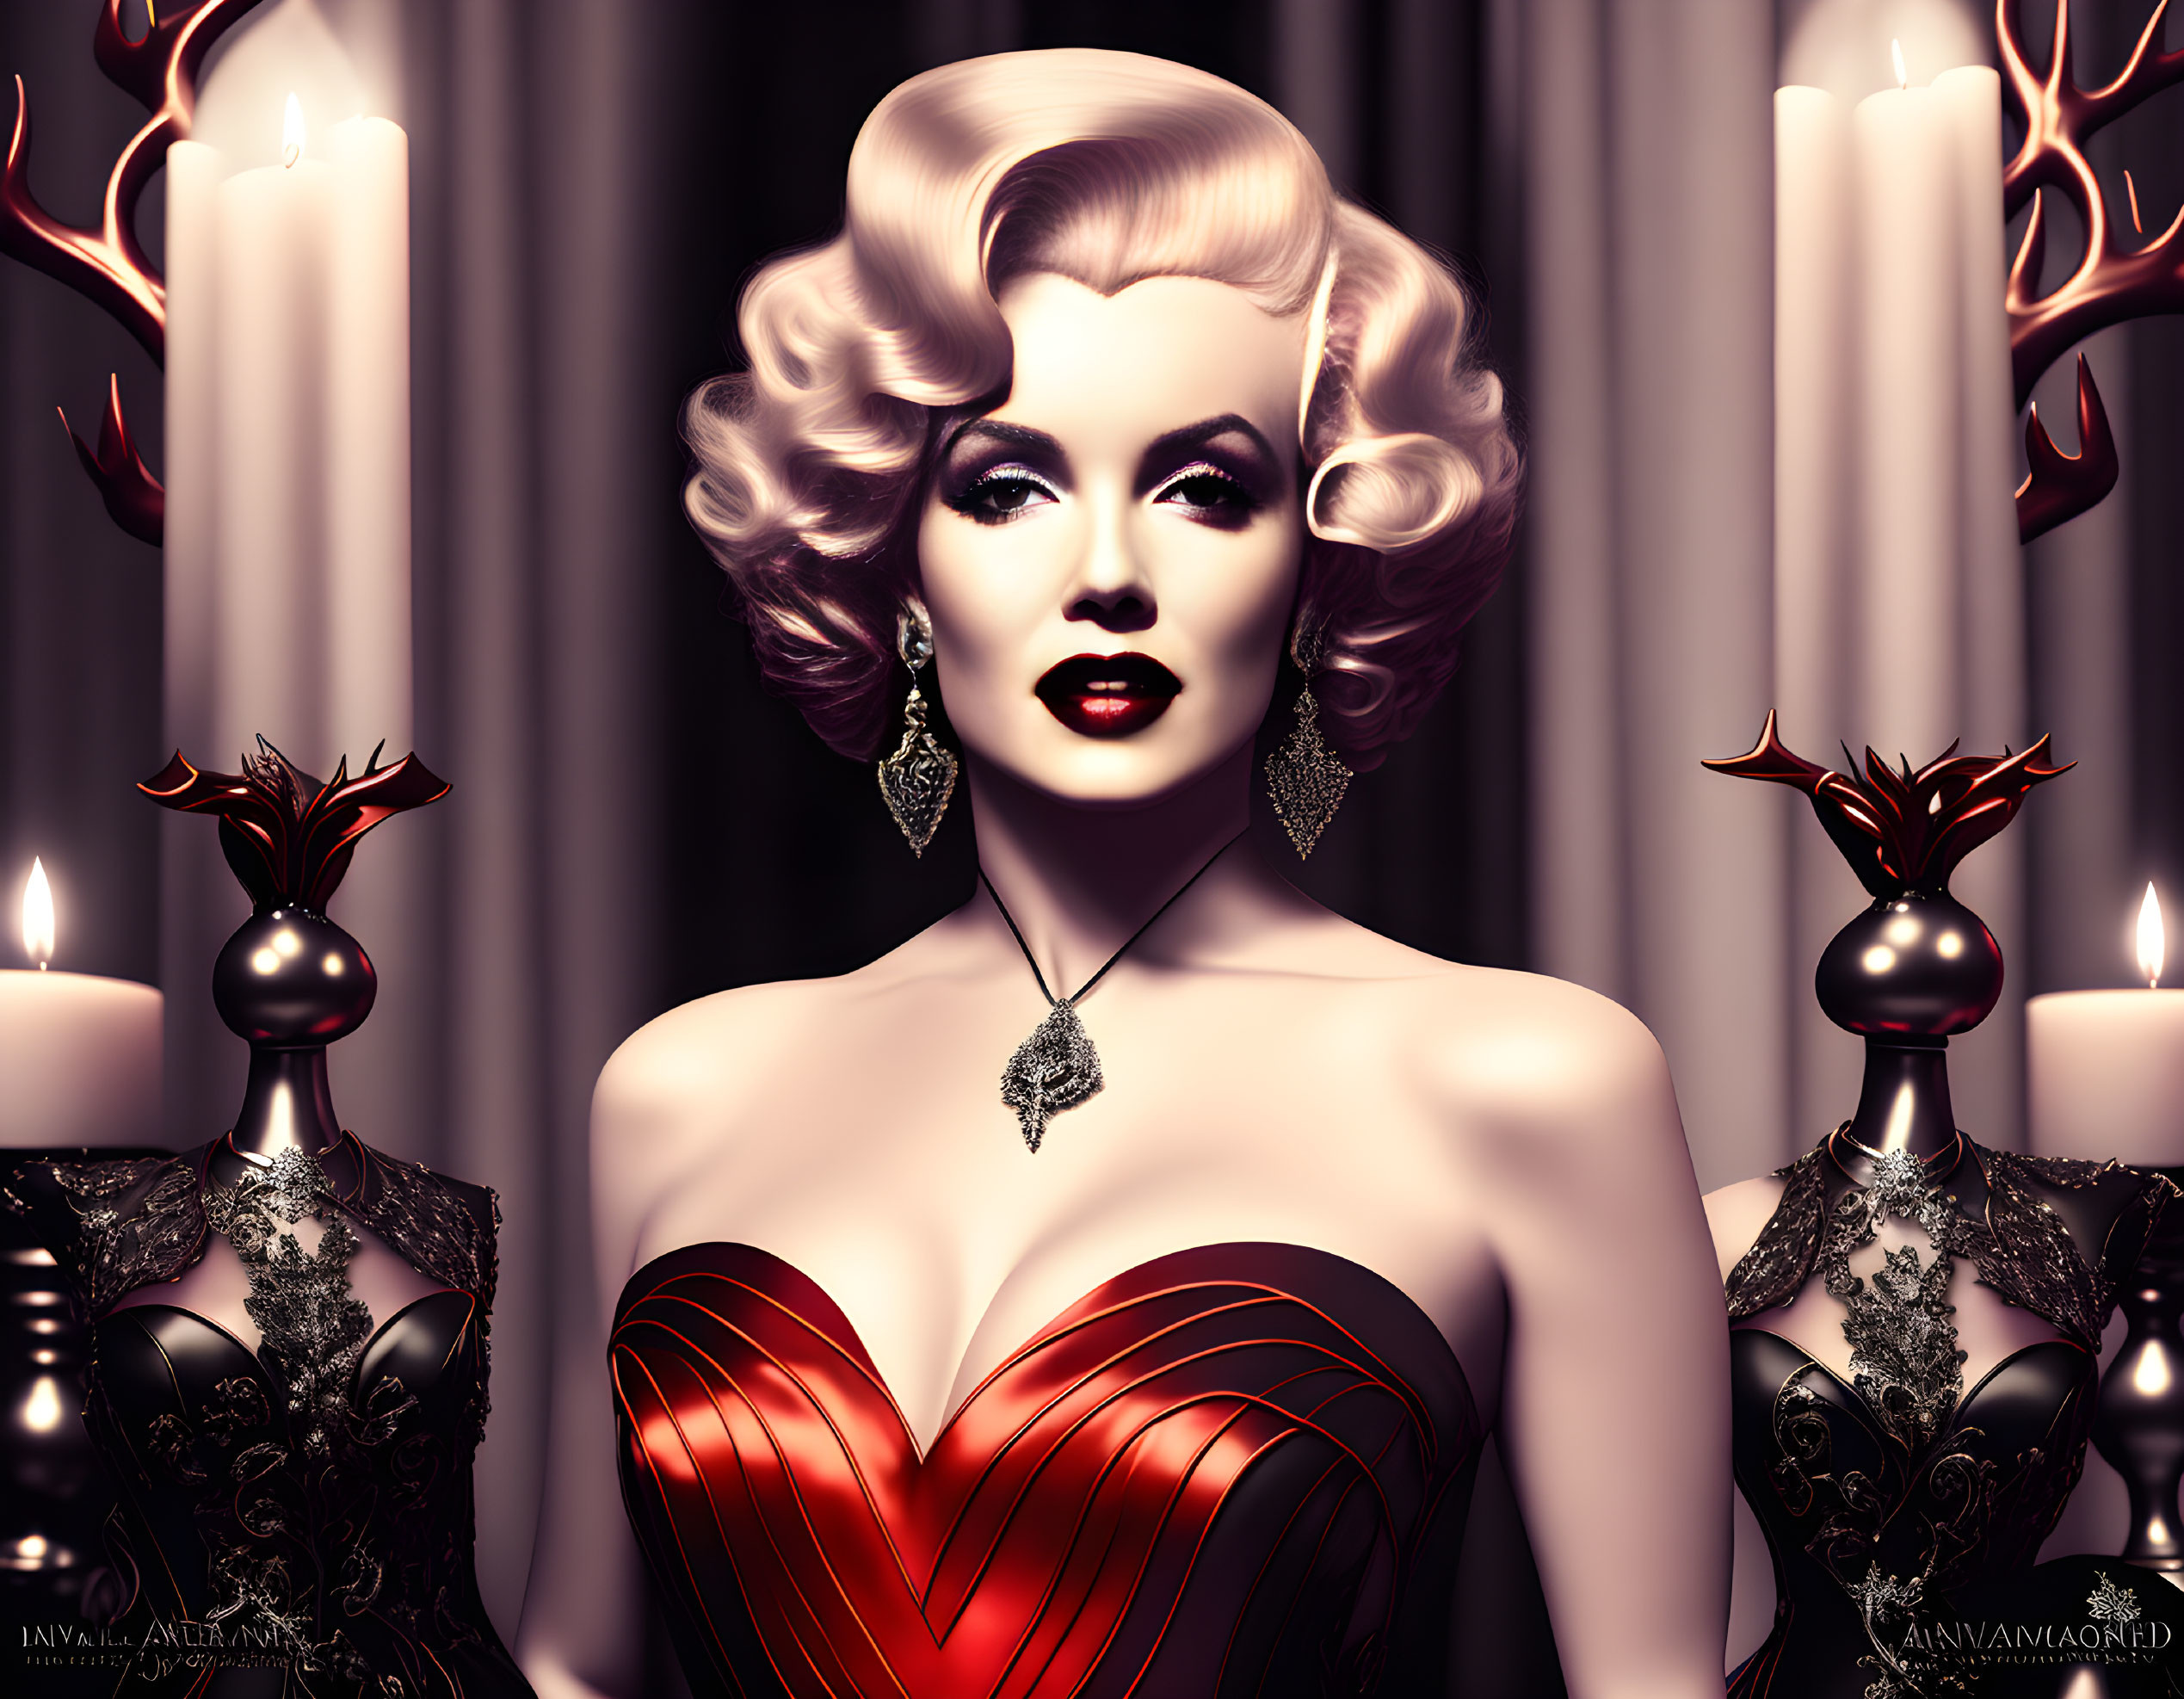 Glamorous woman in vintage hairstyle and red dress with candles and ornate holders.